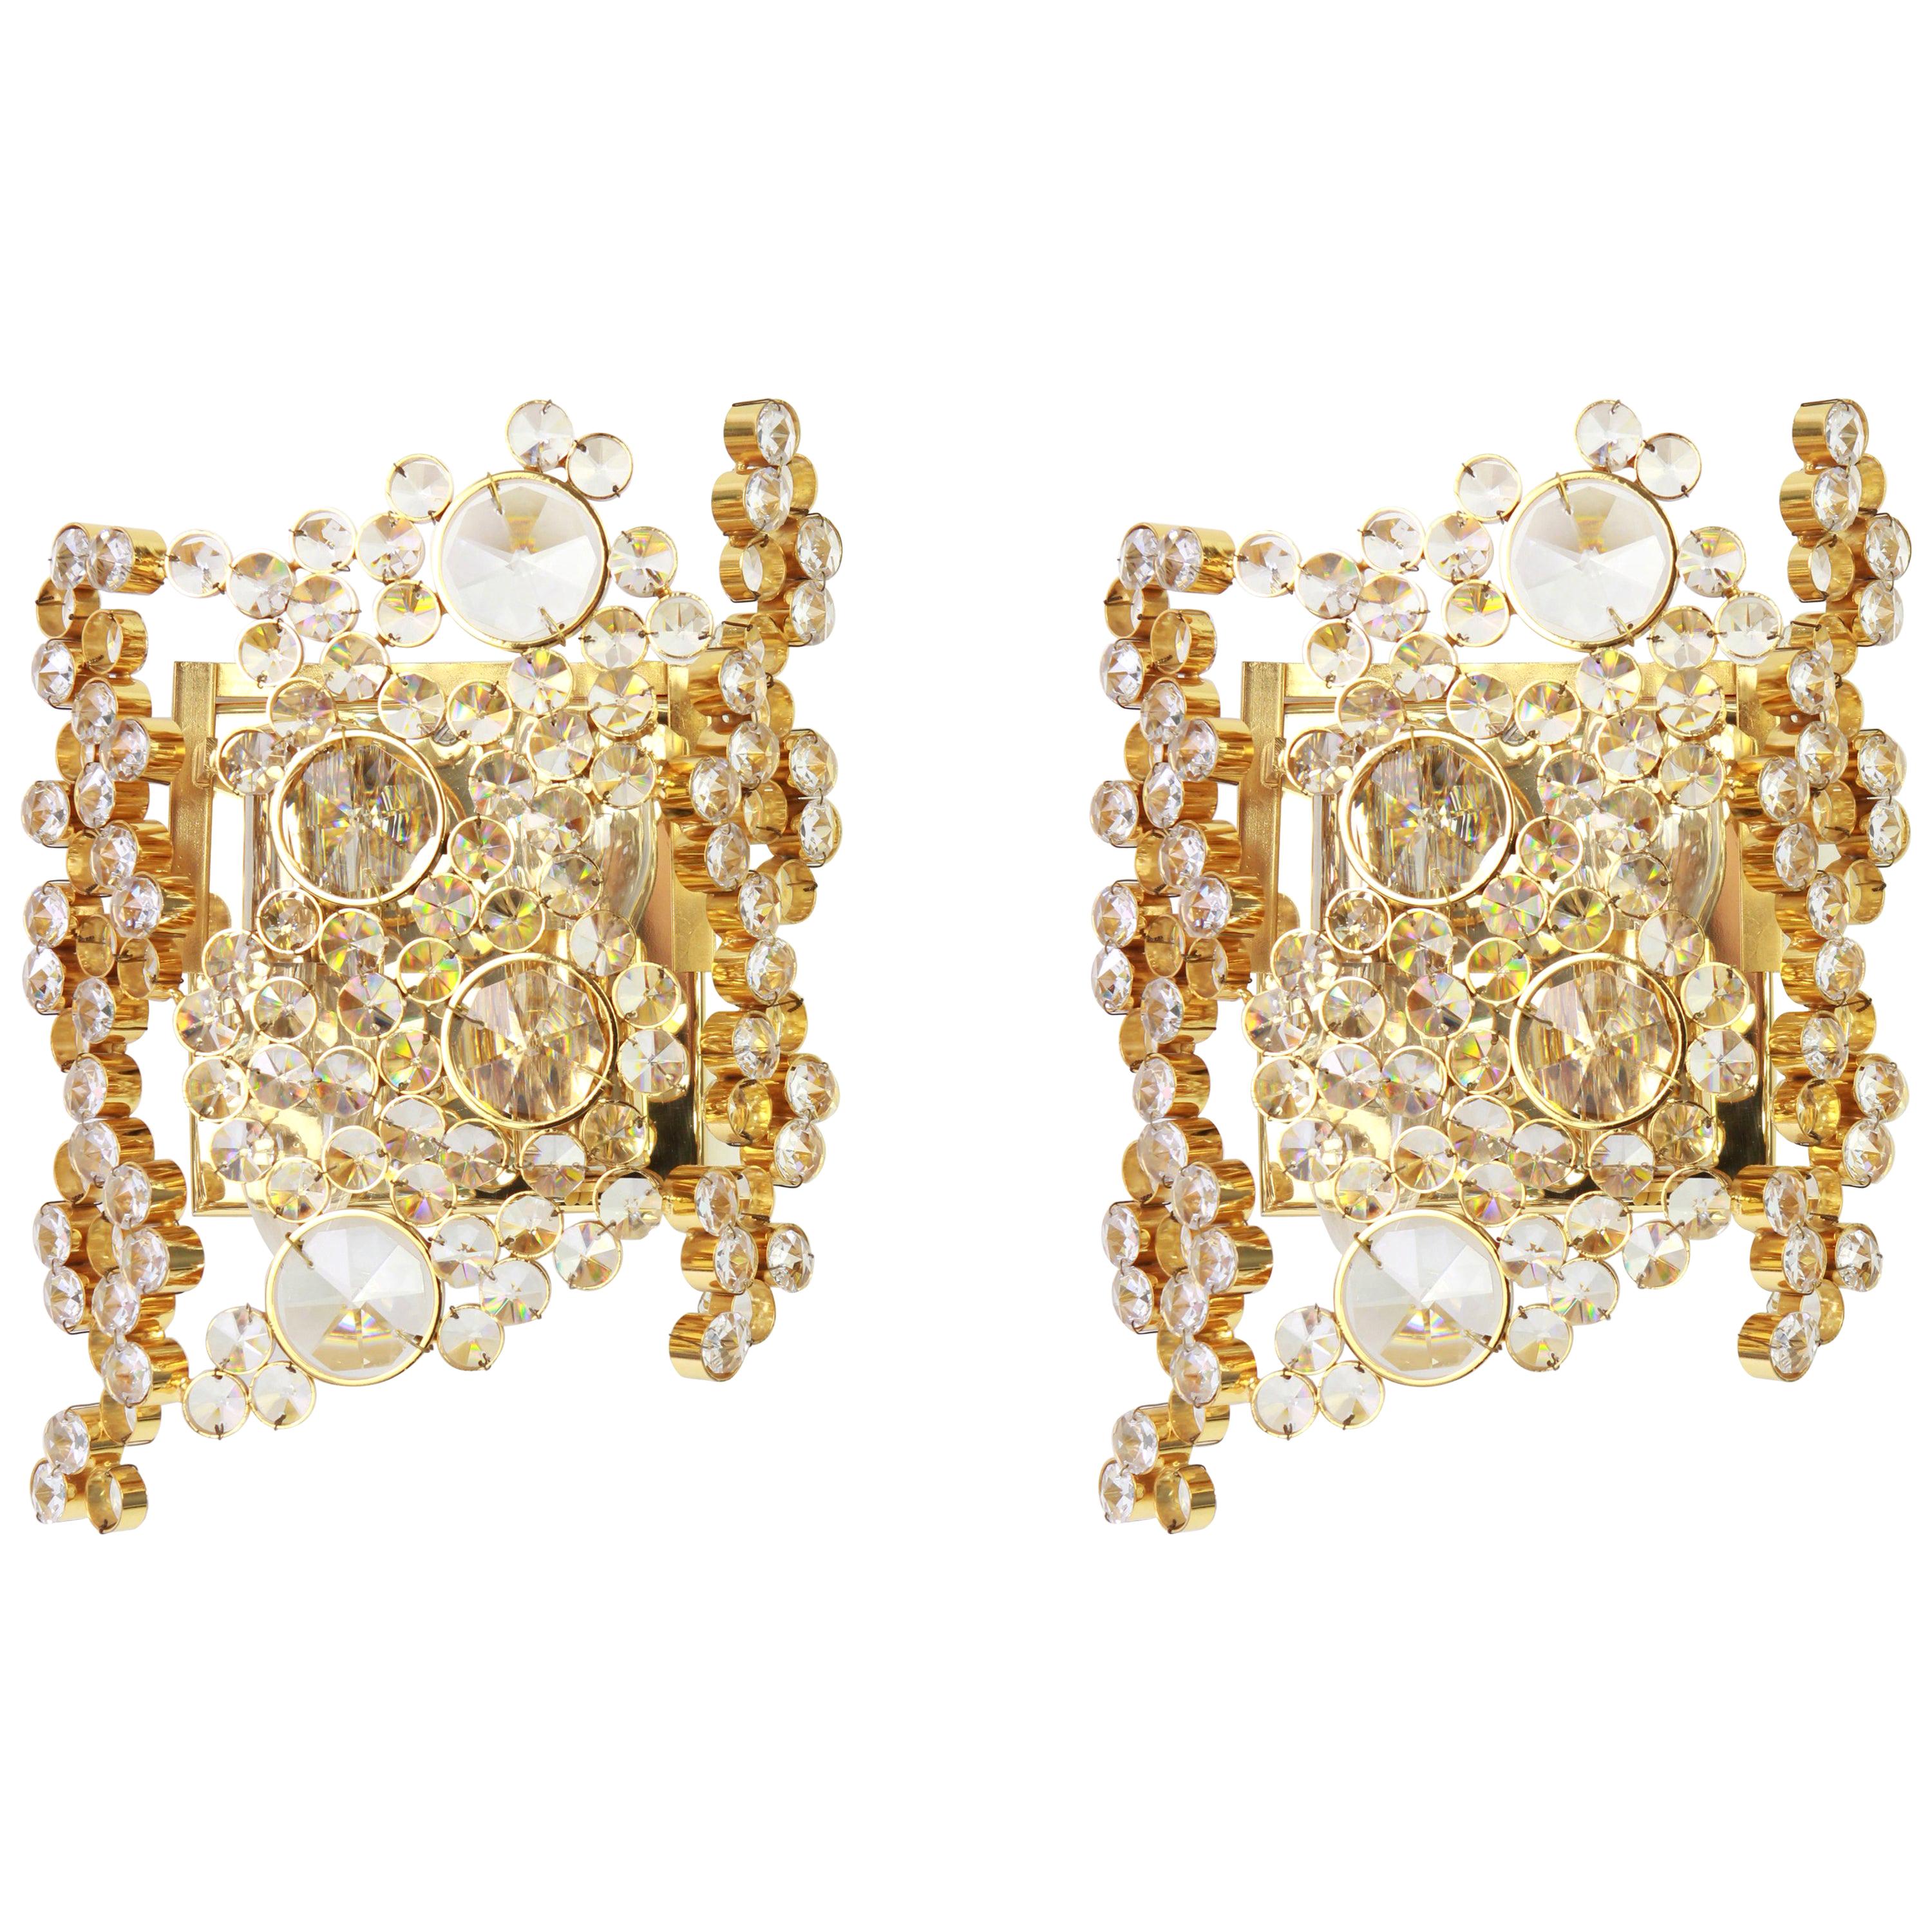 Pair of Golden Gilded Brass and Crystal Sconce by Palwa, Germany, 1960s